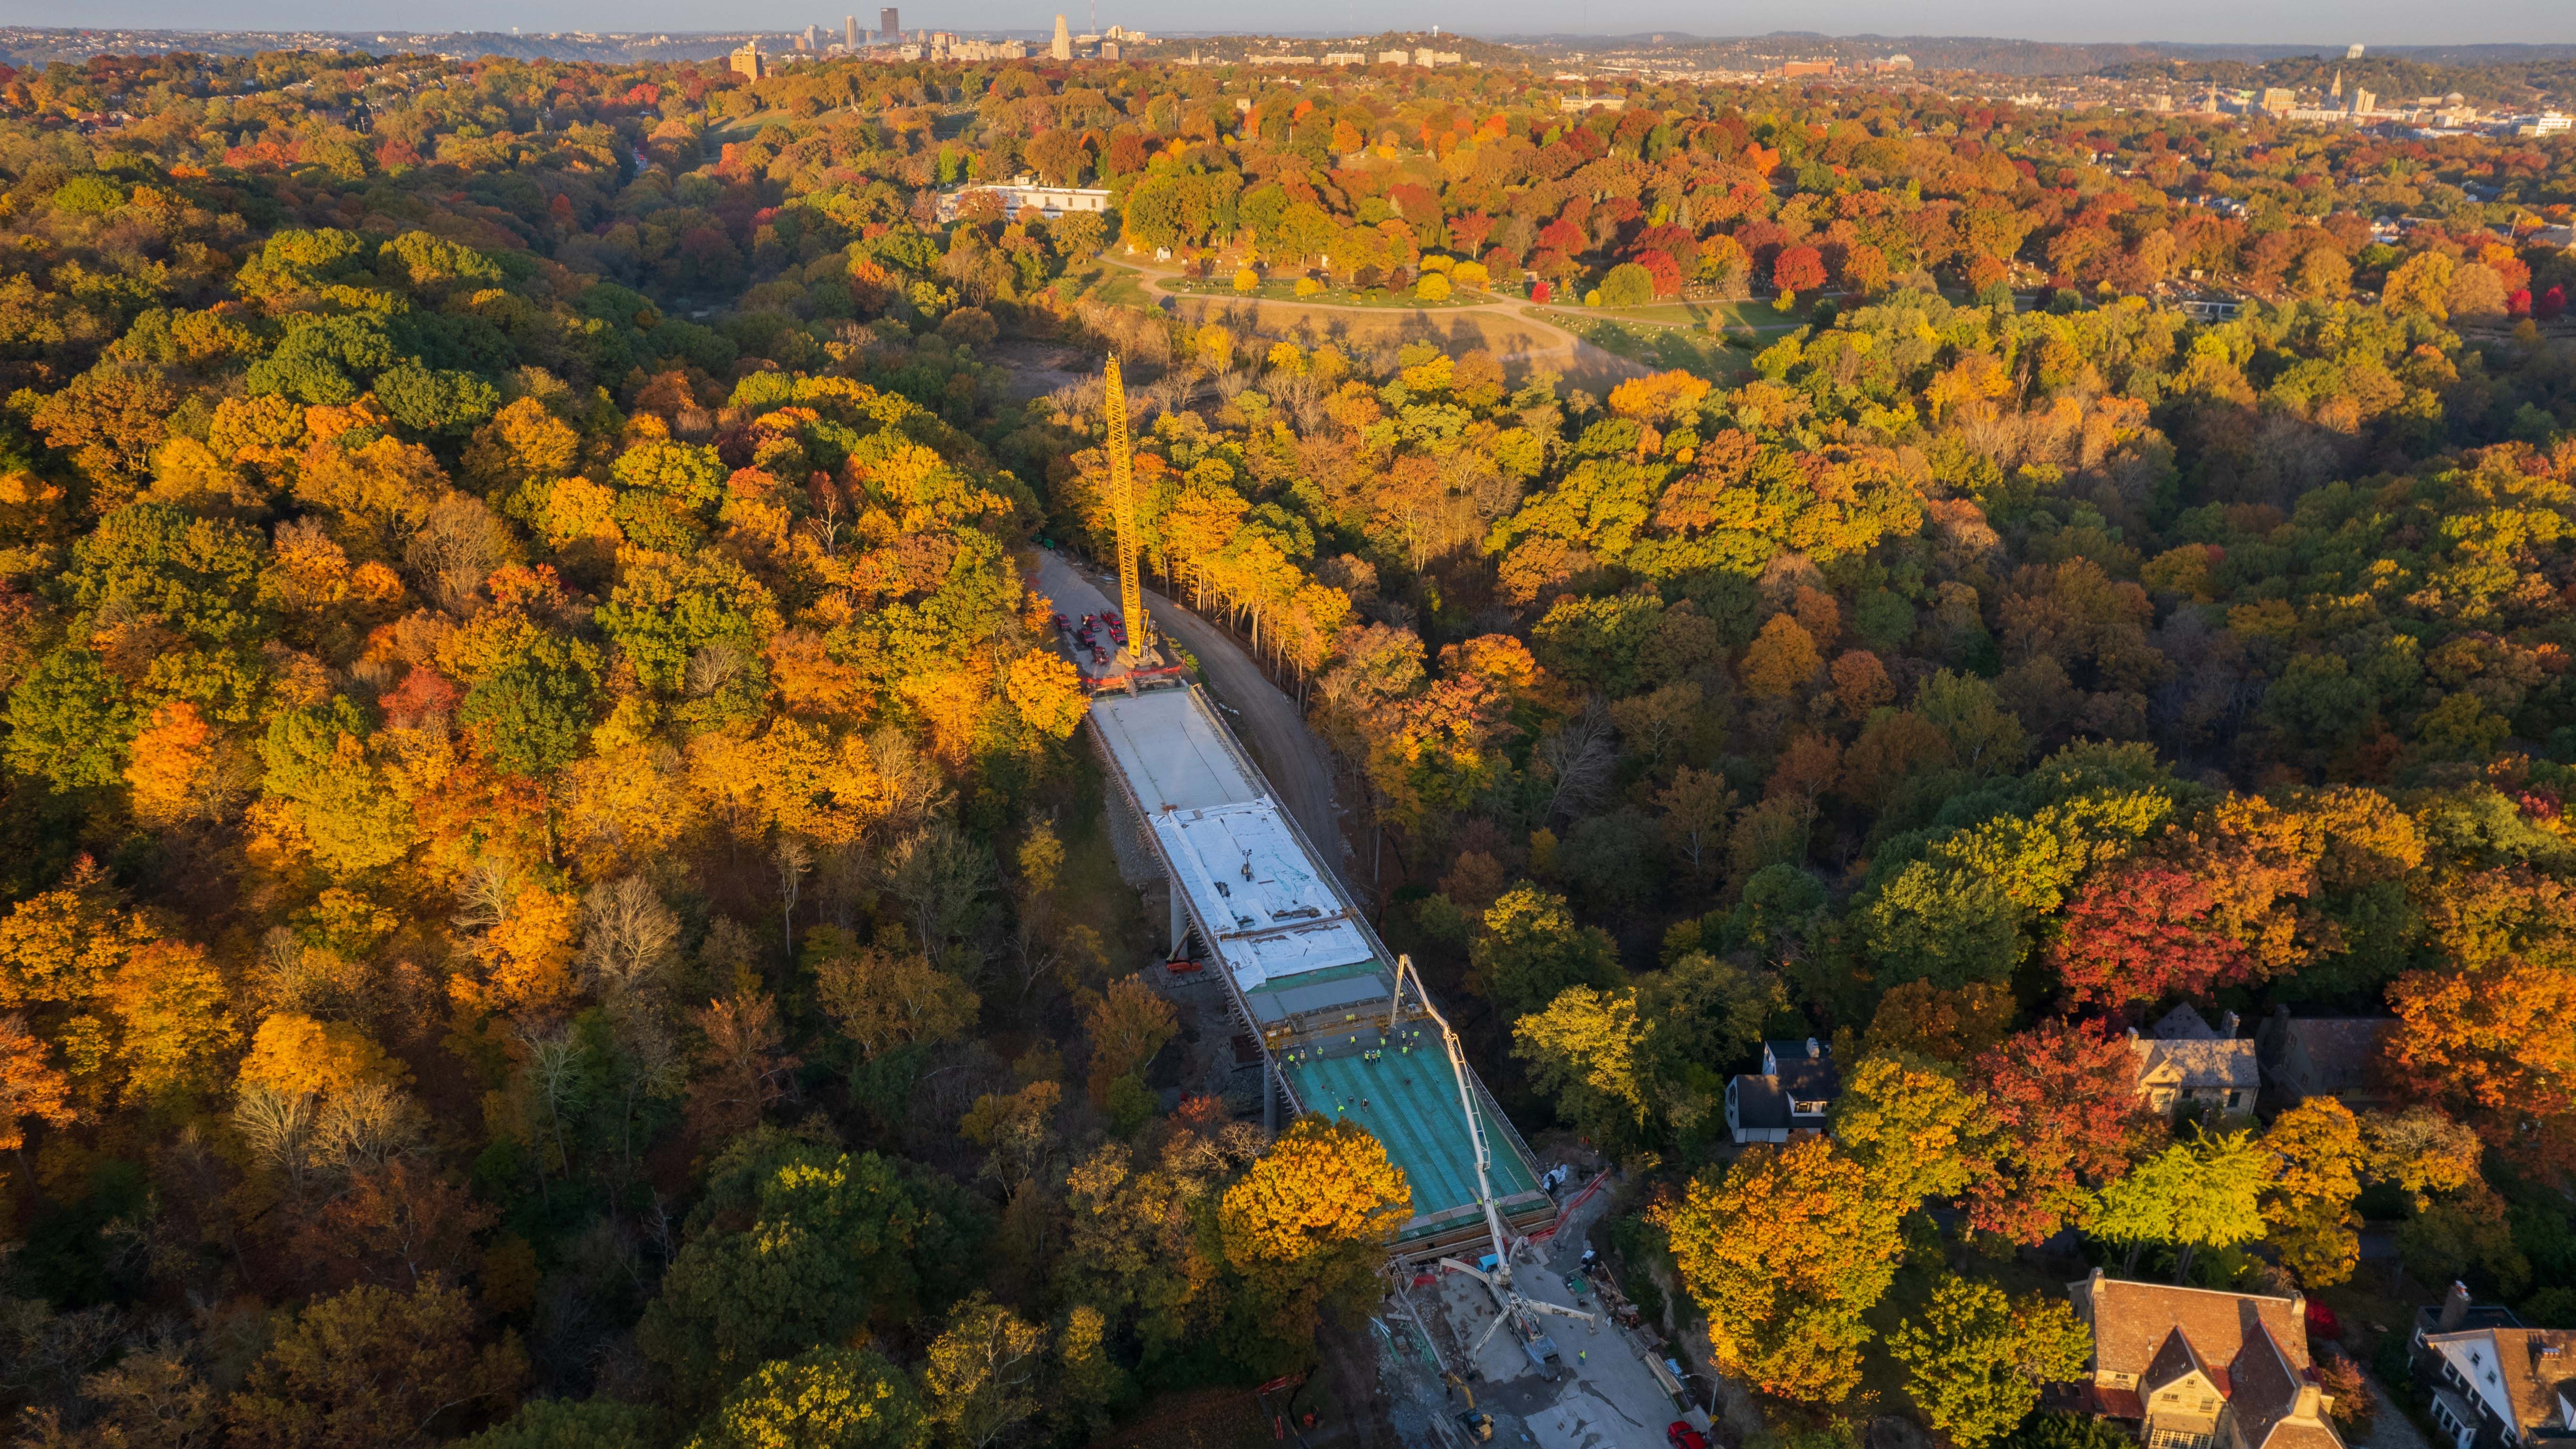 An image of the bridge deck being placed during the rebuilding of the Fern Hollow Bridge with the colors of fall dotting the landscape surrounding the bridge